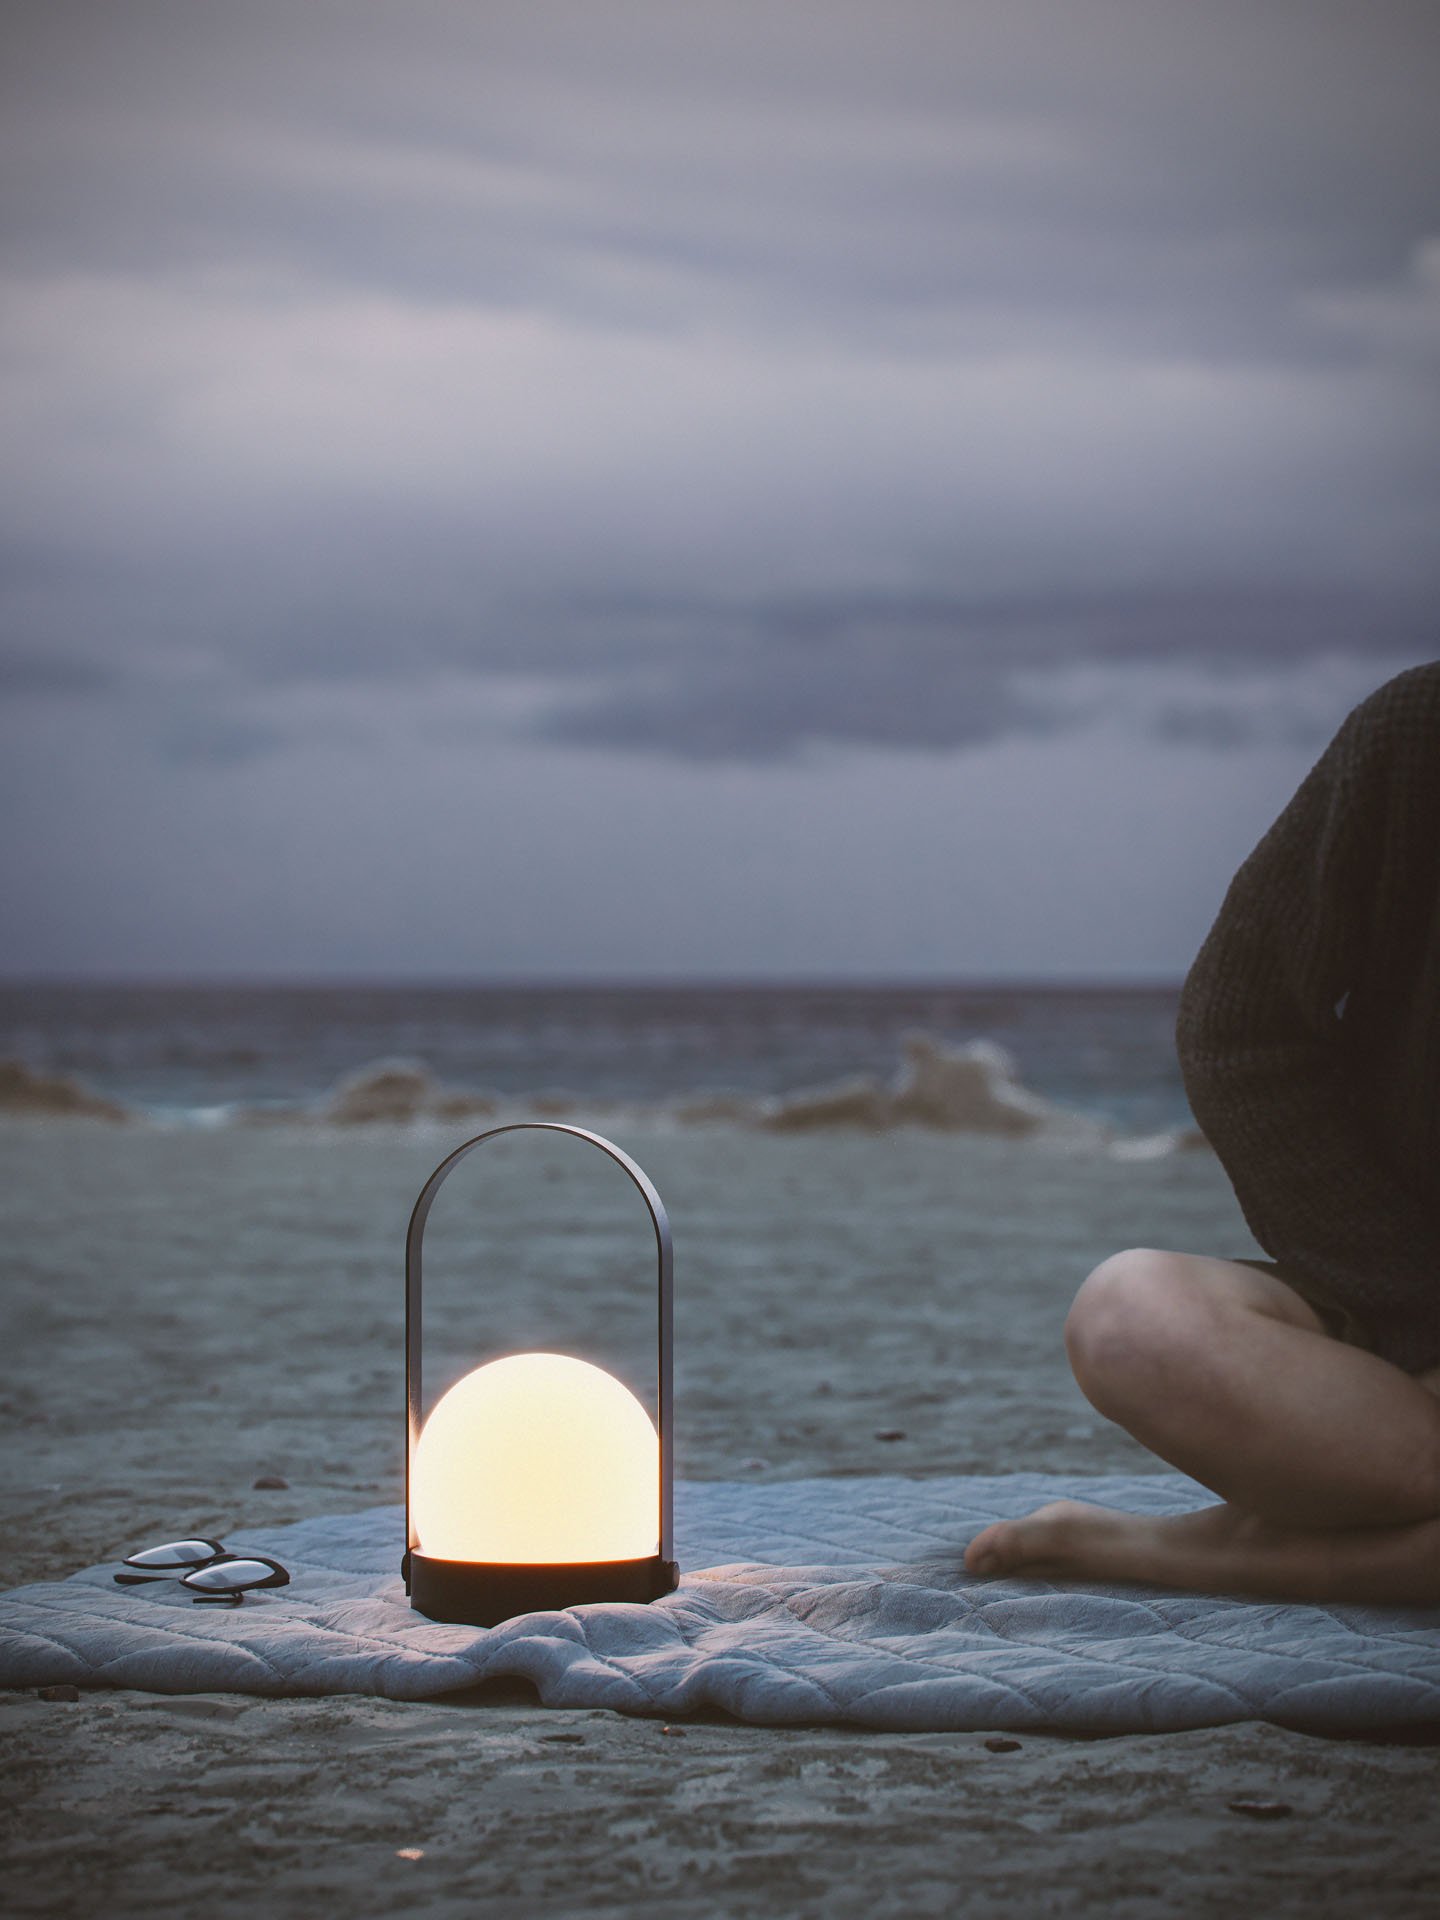 3D Rendering for a Portable Lamp on the Beach